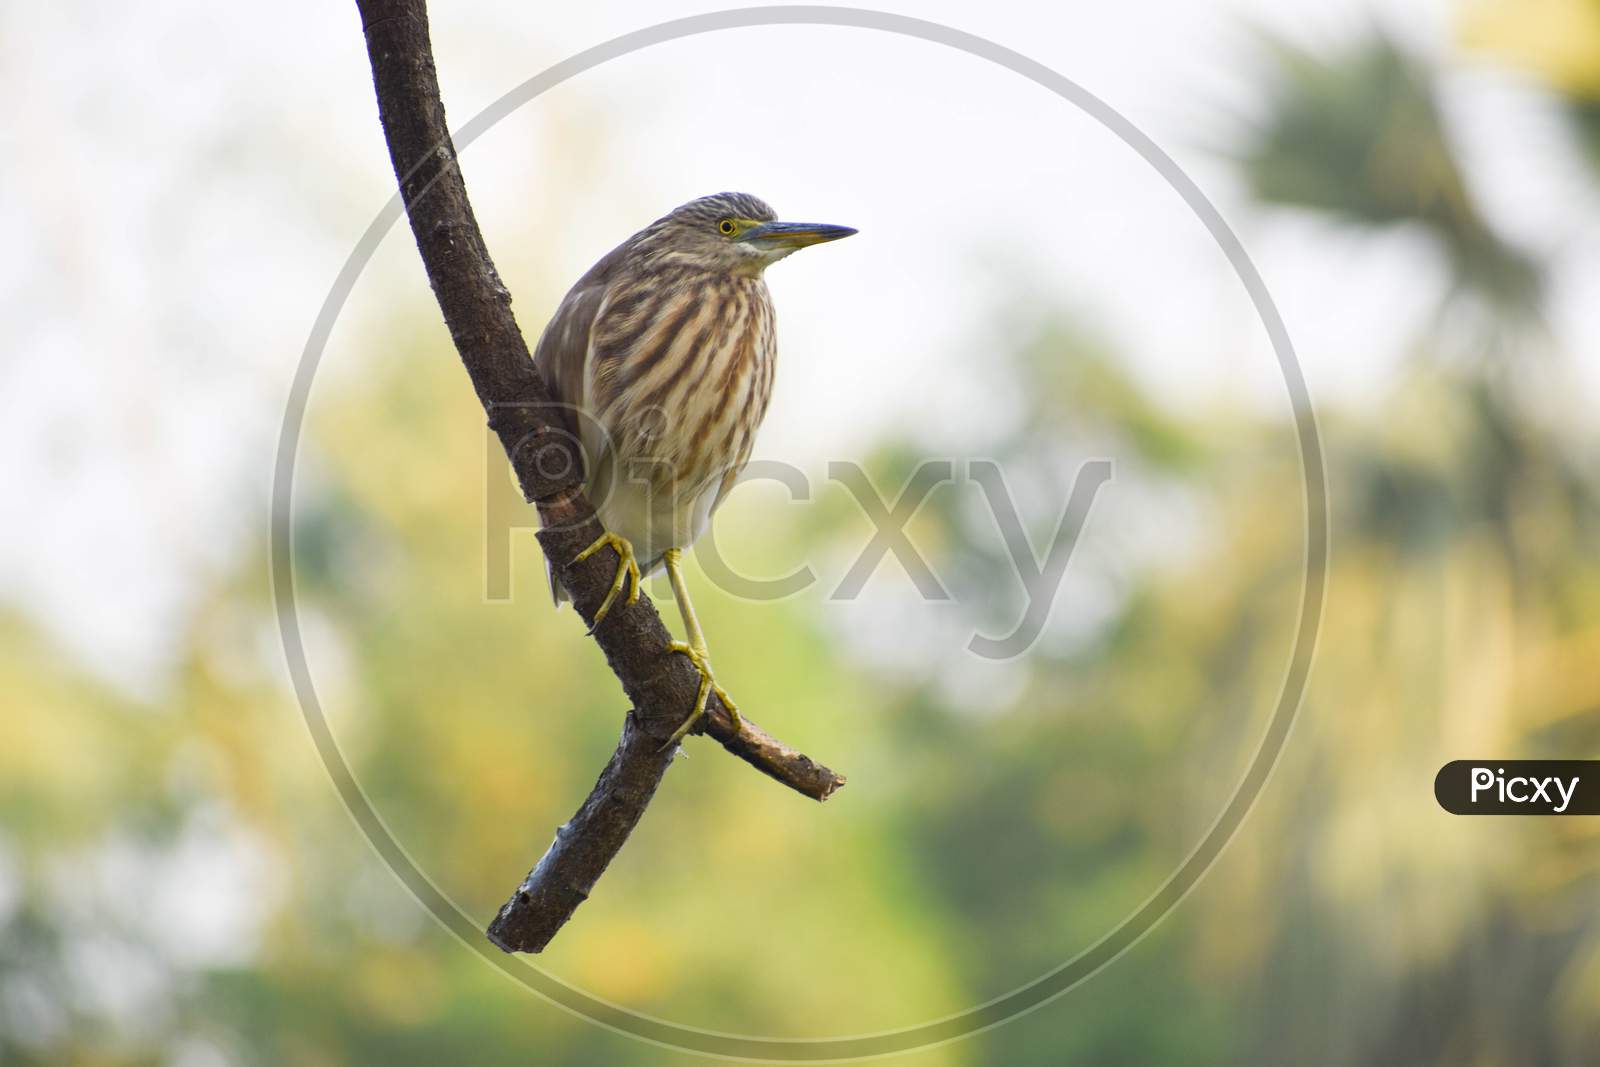 Wildlife Birds Of India .Indian Heron Sitting On Tree Branch Looking Sideways With Green Blur Background.